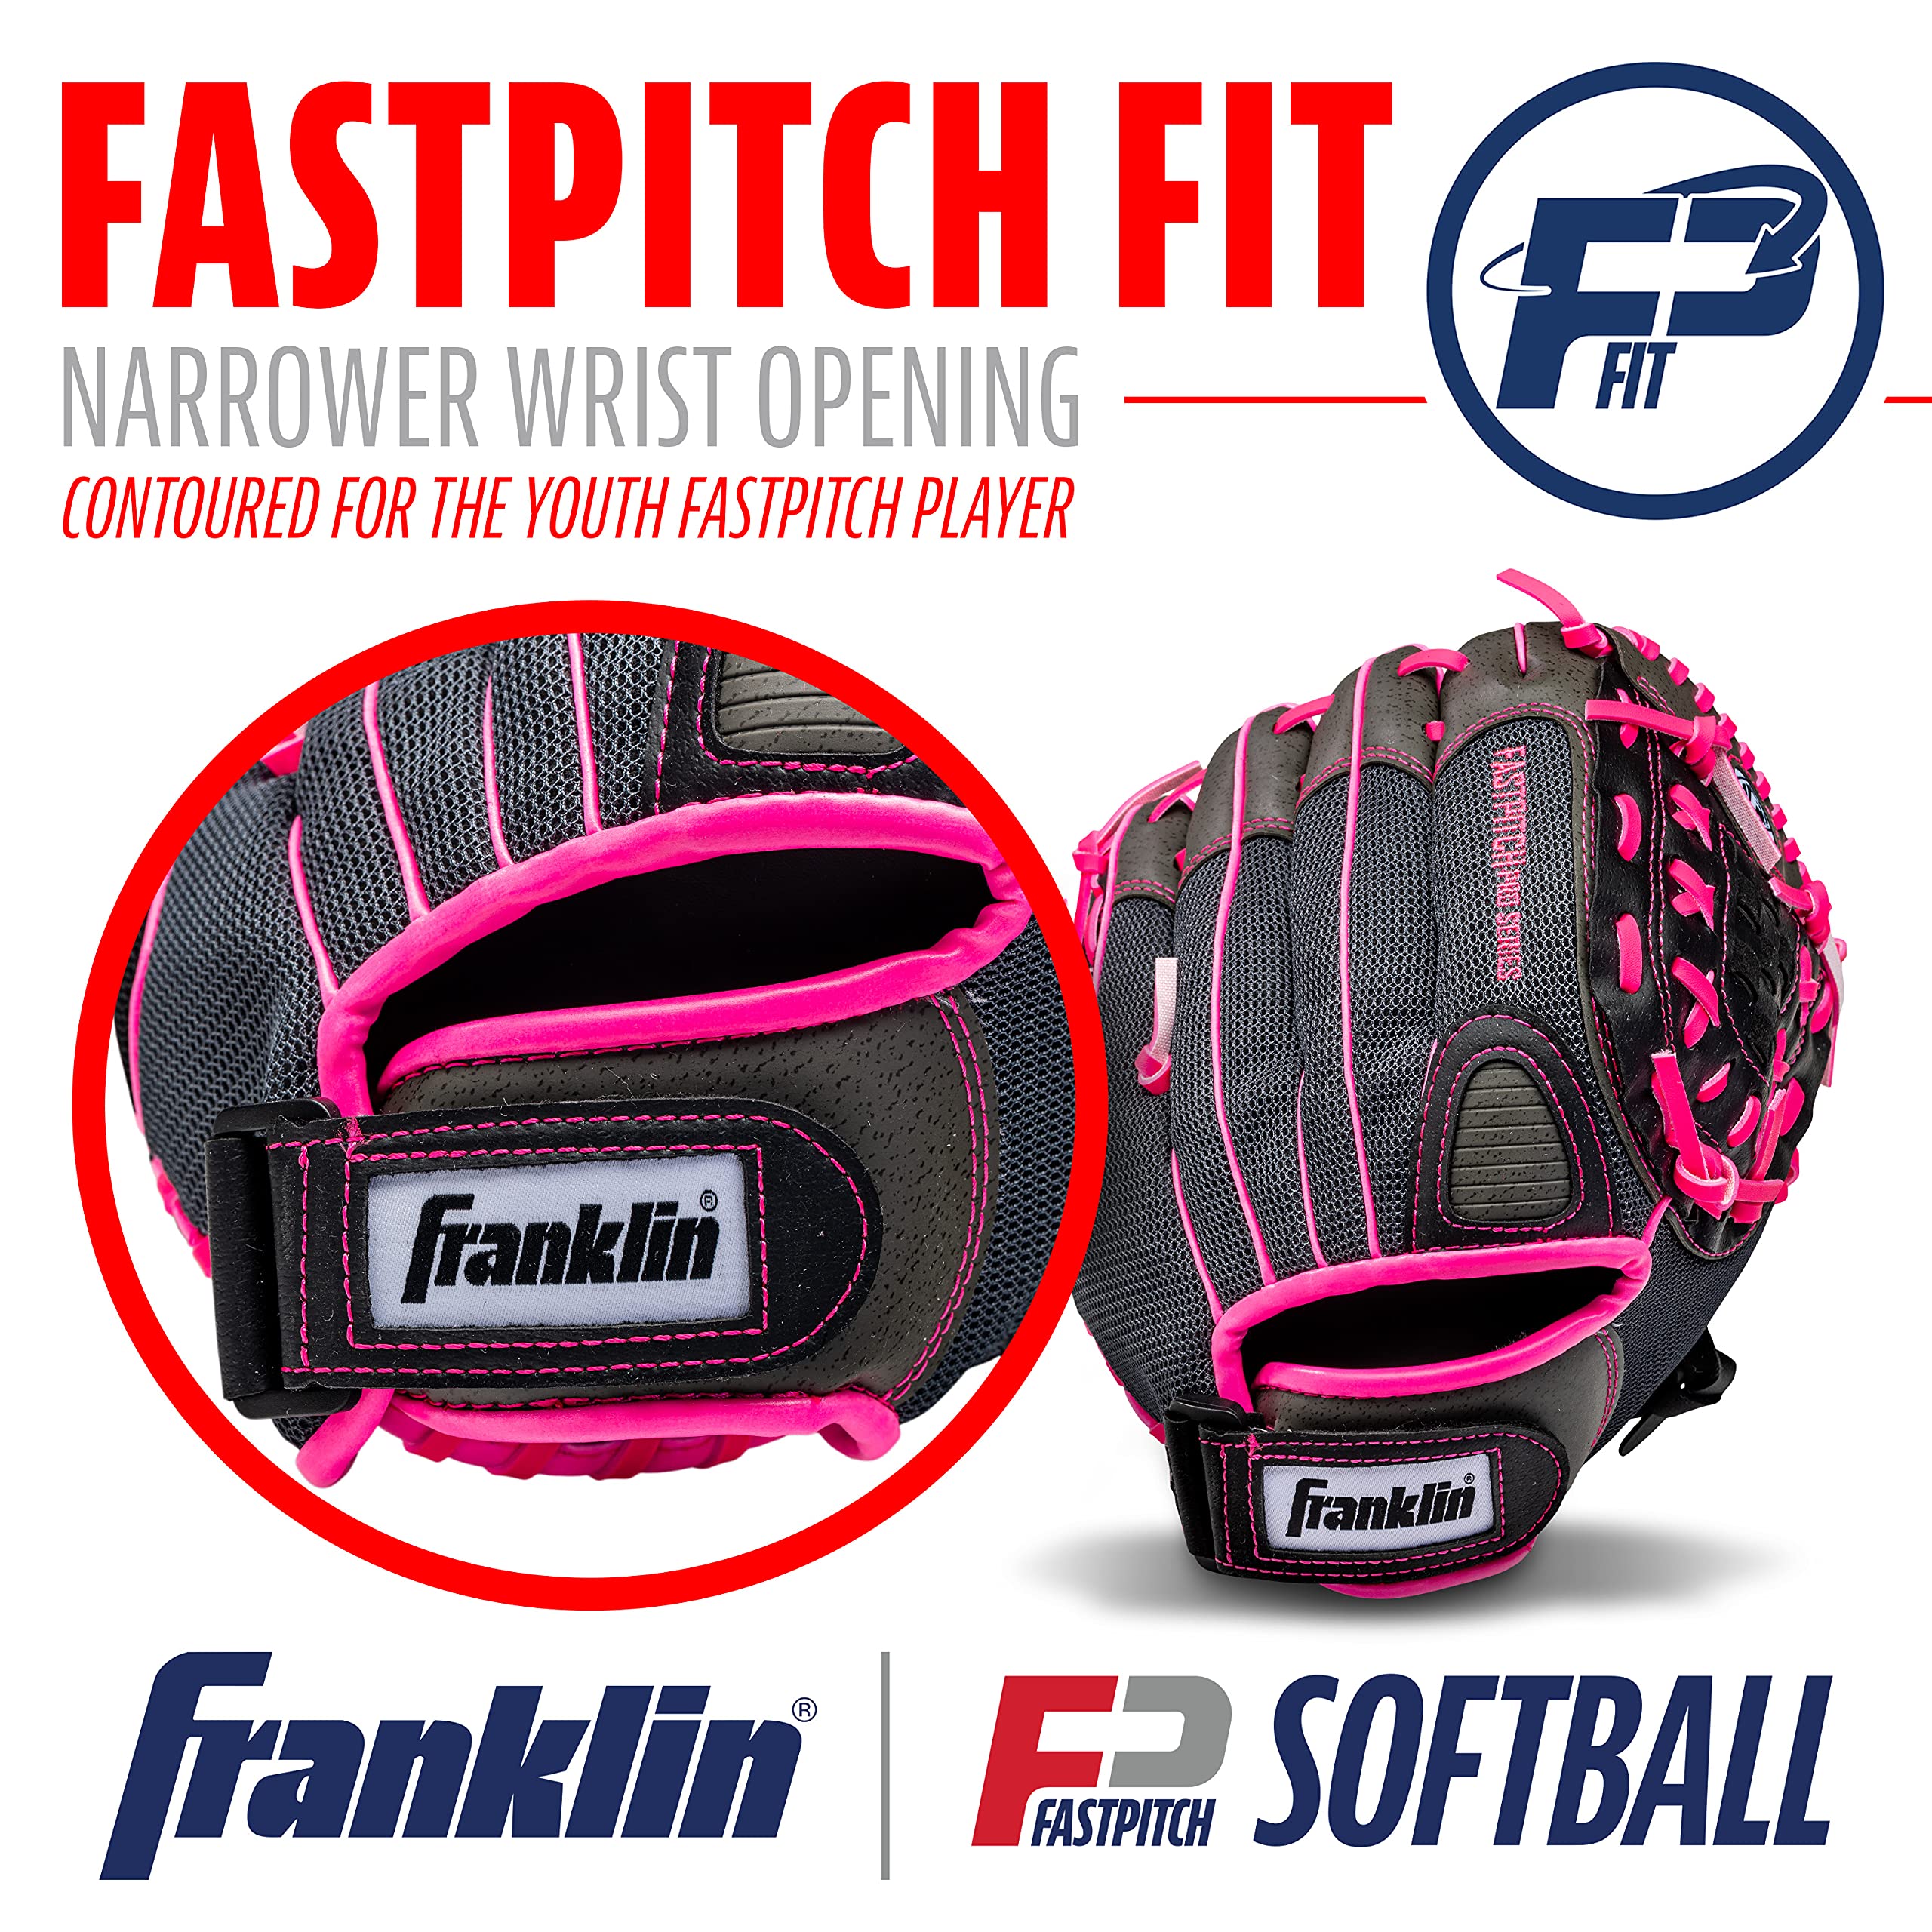 Franklin Sports Fastpitch Softball Gloves - Windmill Adult + Youth Fielding Gloves - Left + Right Handed Softball Gloves for Women + Girls - 11